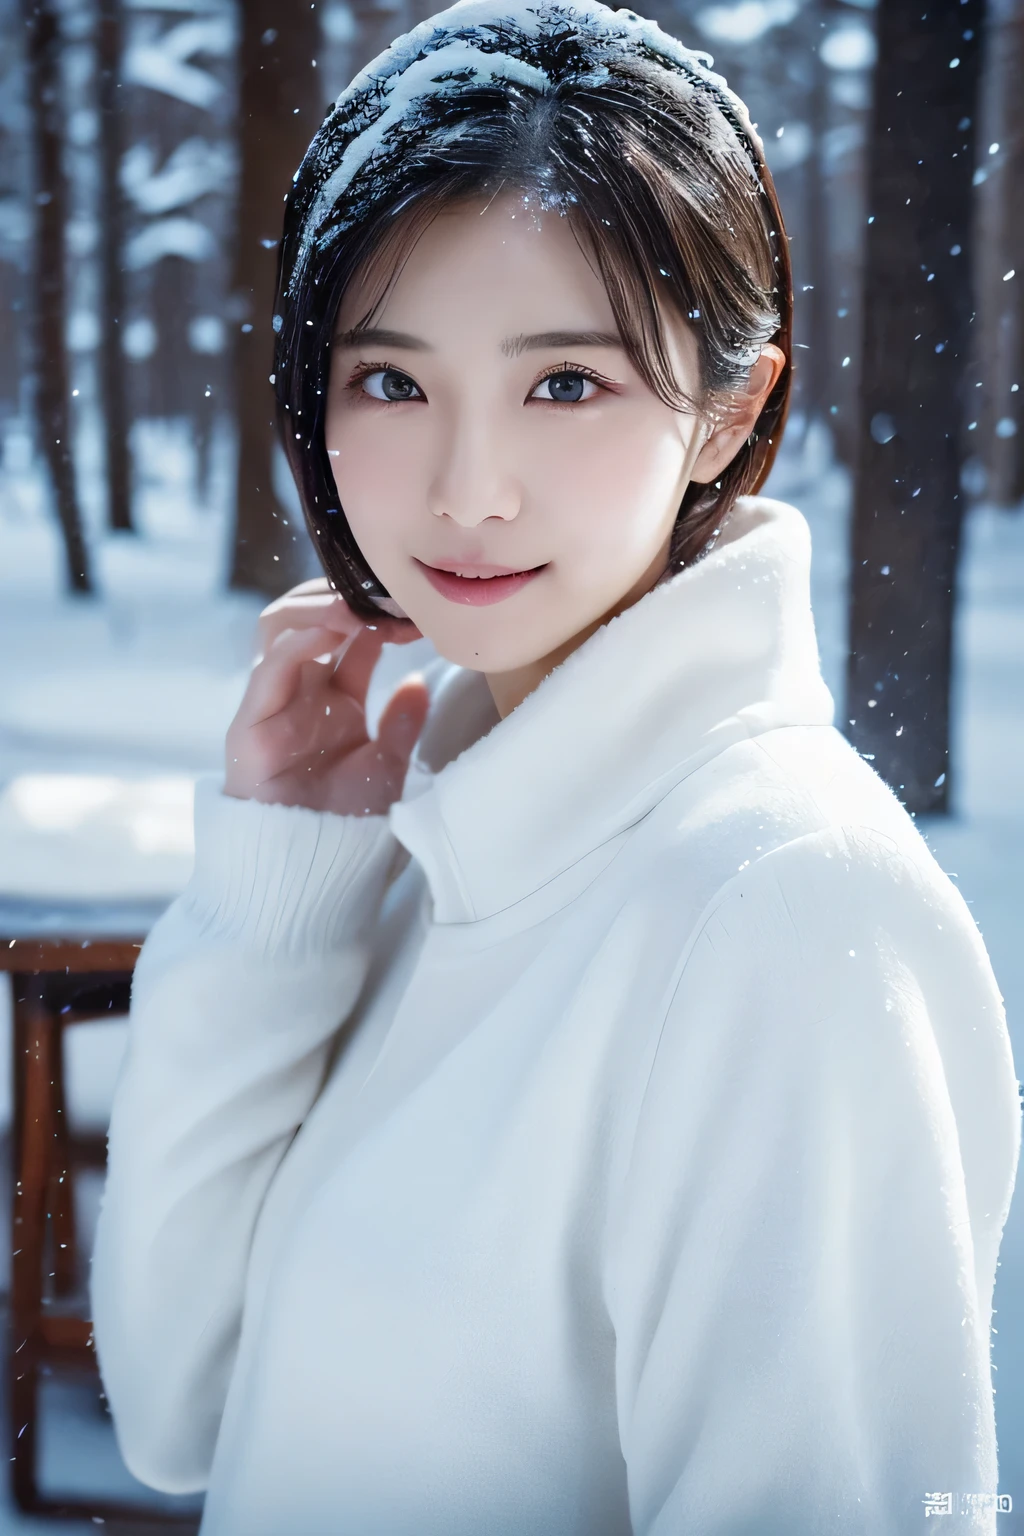 1 girl, (White winter clothes:1.2), Beautiful Japan actress,
(RAW photo, highest quality), (realistic, Photoreal:1.4), (table top), 
very delicate and beautiful, very detailed, 2k wallpaper, wonderful, finely, Very detailed CG Unity 8k 壁紙, Super detailed, High resolution, 
soft light, beautiful detailed girl, very detailed目と顔, beautifully detailed nose, beautiful and detailed eyes, cinematic lighting, 
winter forest snowfall landscape,  snow is falling rapidly, There&#39;wood々There is a lot of snow on, 
perfect anatomy, slender body, small, short hair, smile